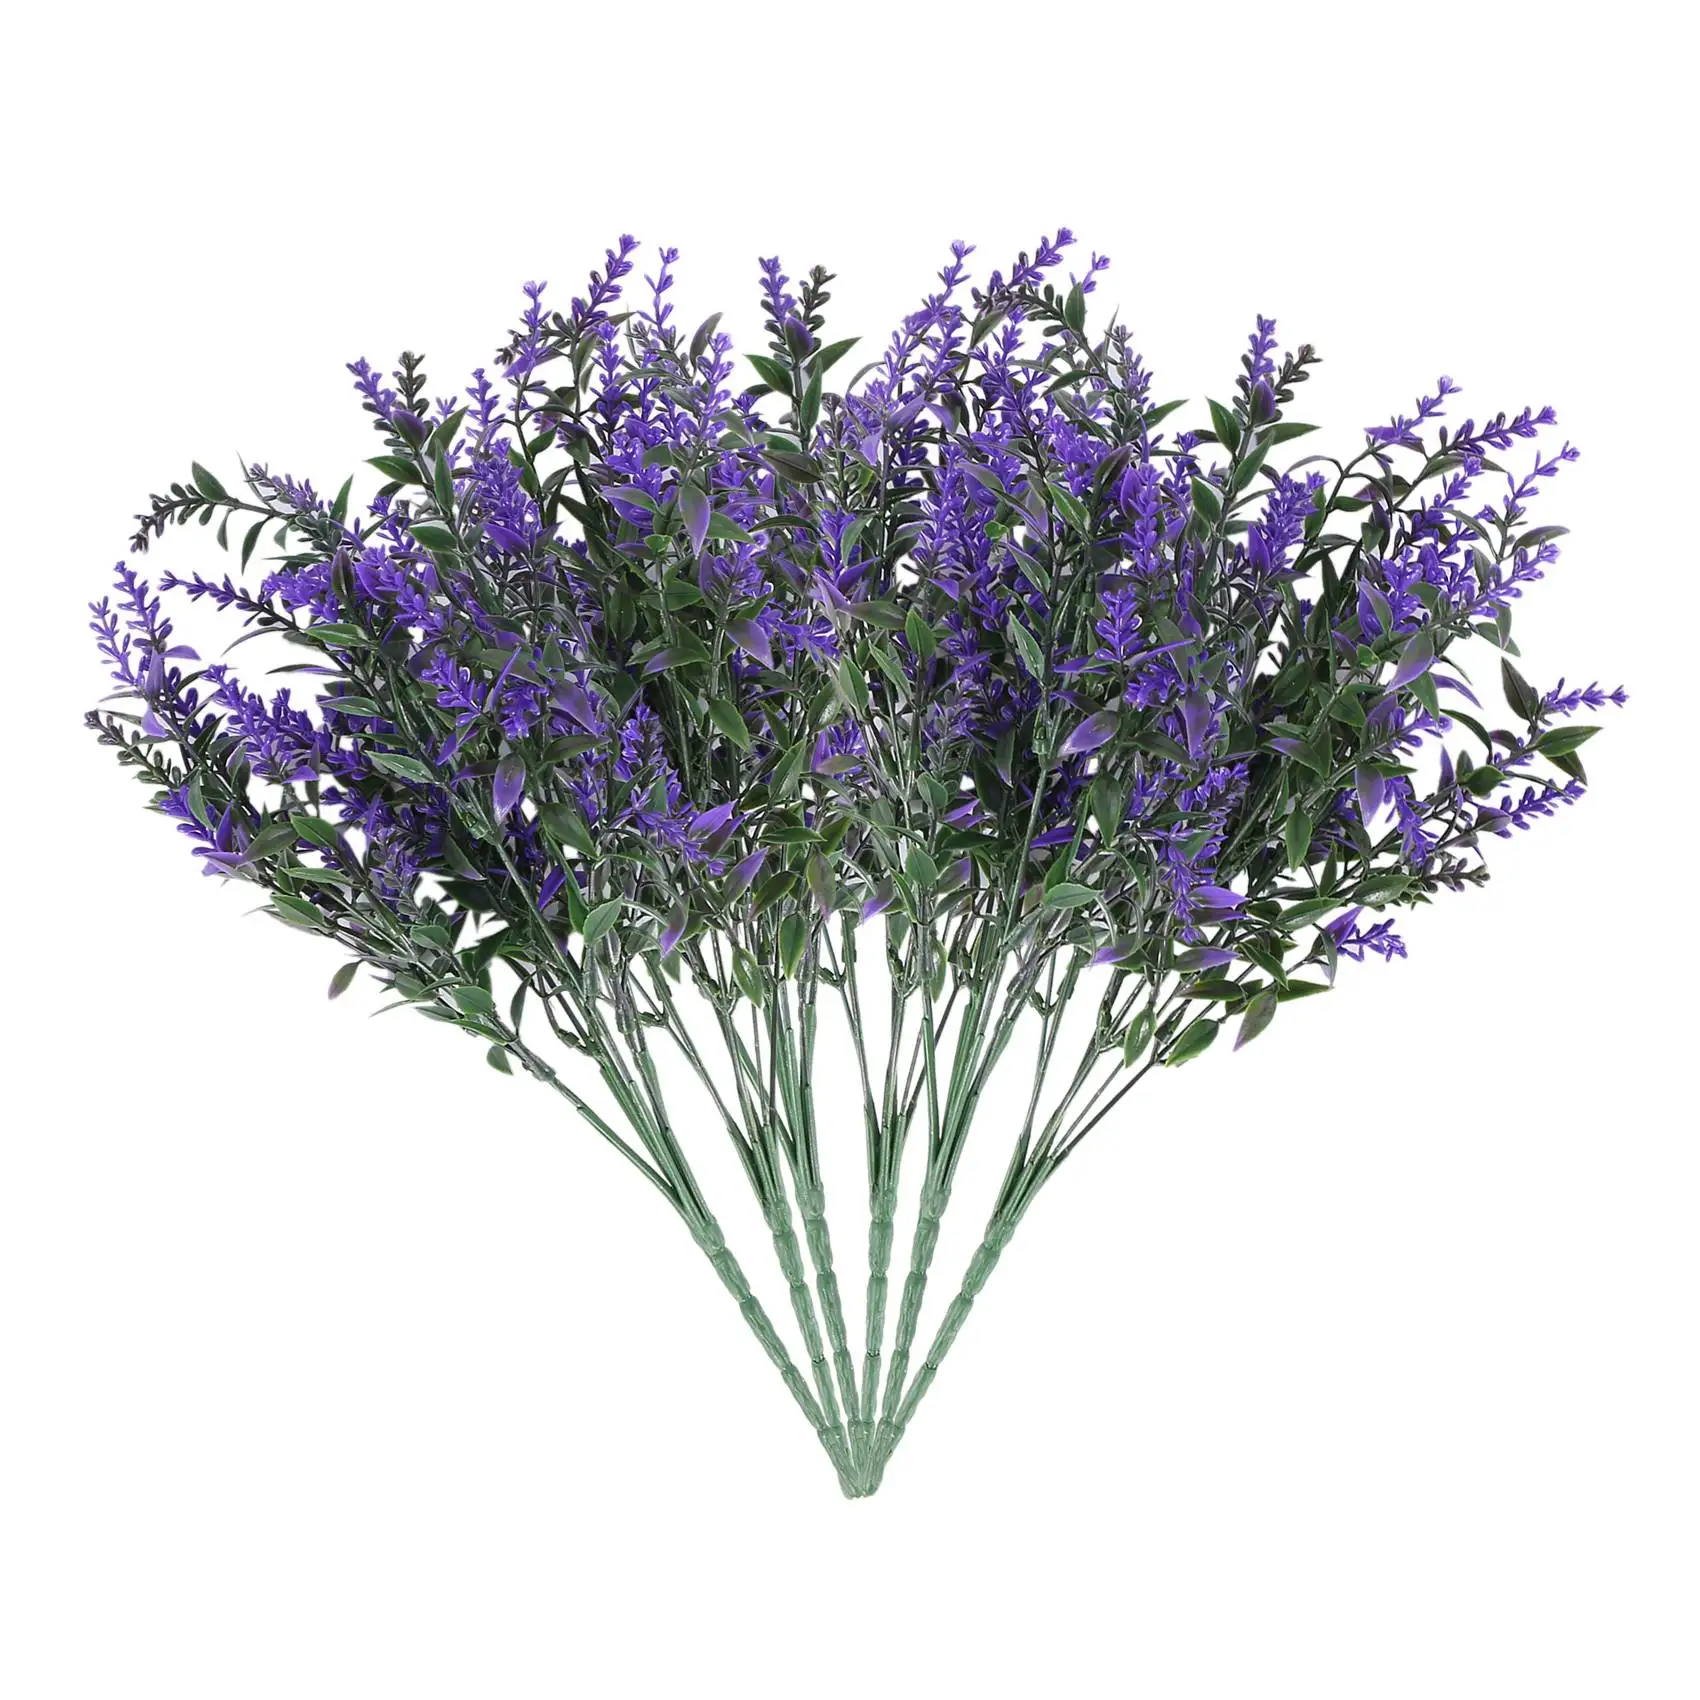 

Artificial Lavender Flowers Plants 6 Pieces Lifelike Uv Resistant Fake Shrubs Greenery Bushes Bouquet To Brighten Up Your Hom